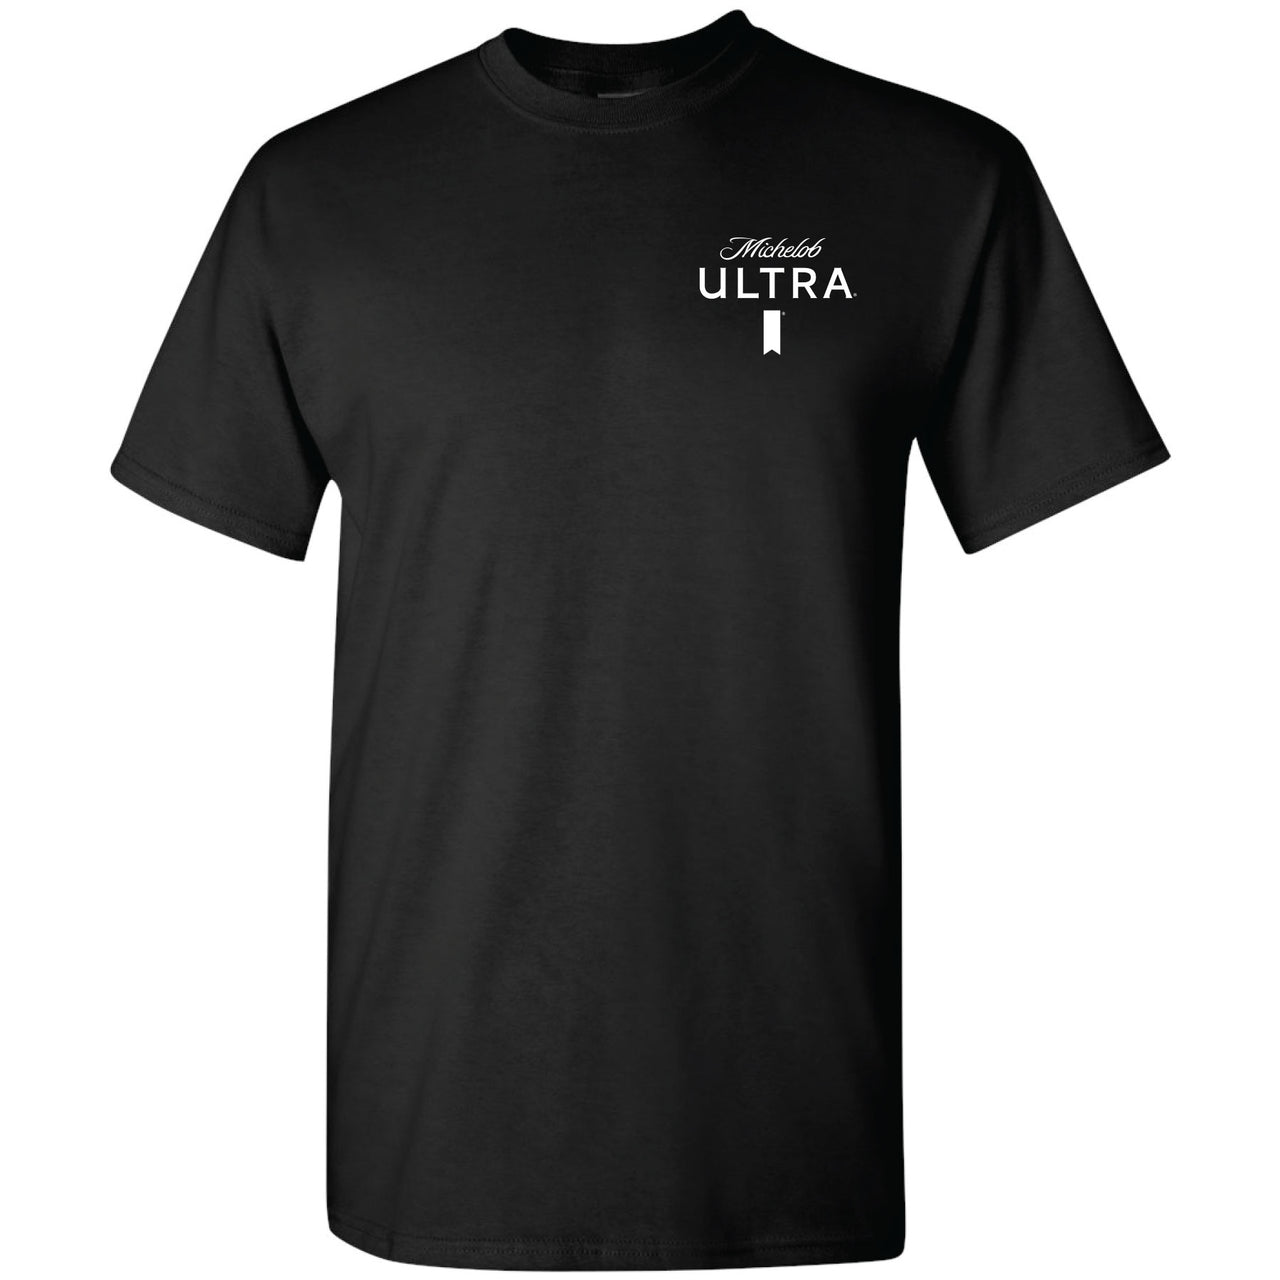 Michelob Golf Neon 2-sided T-Shirt